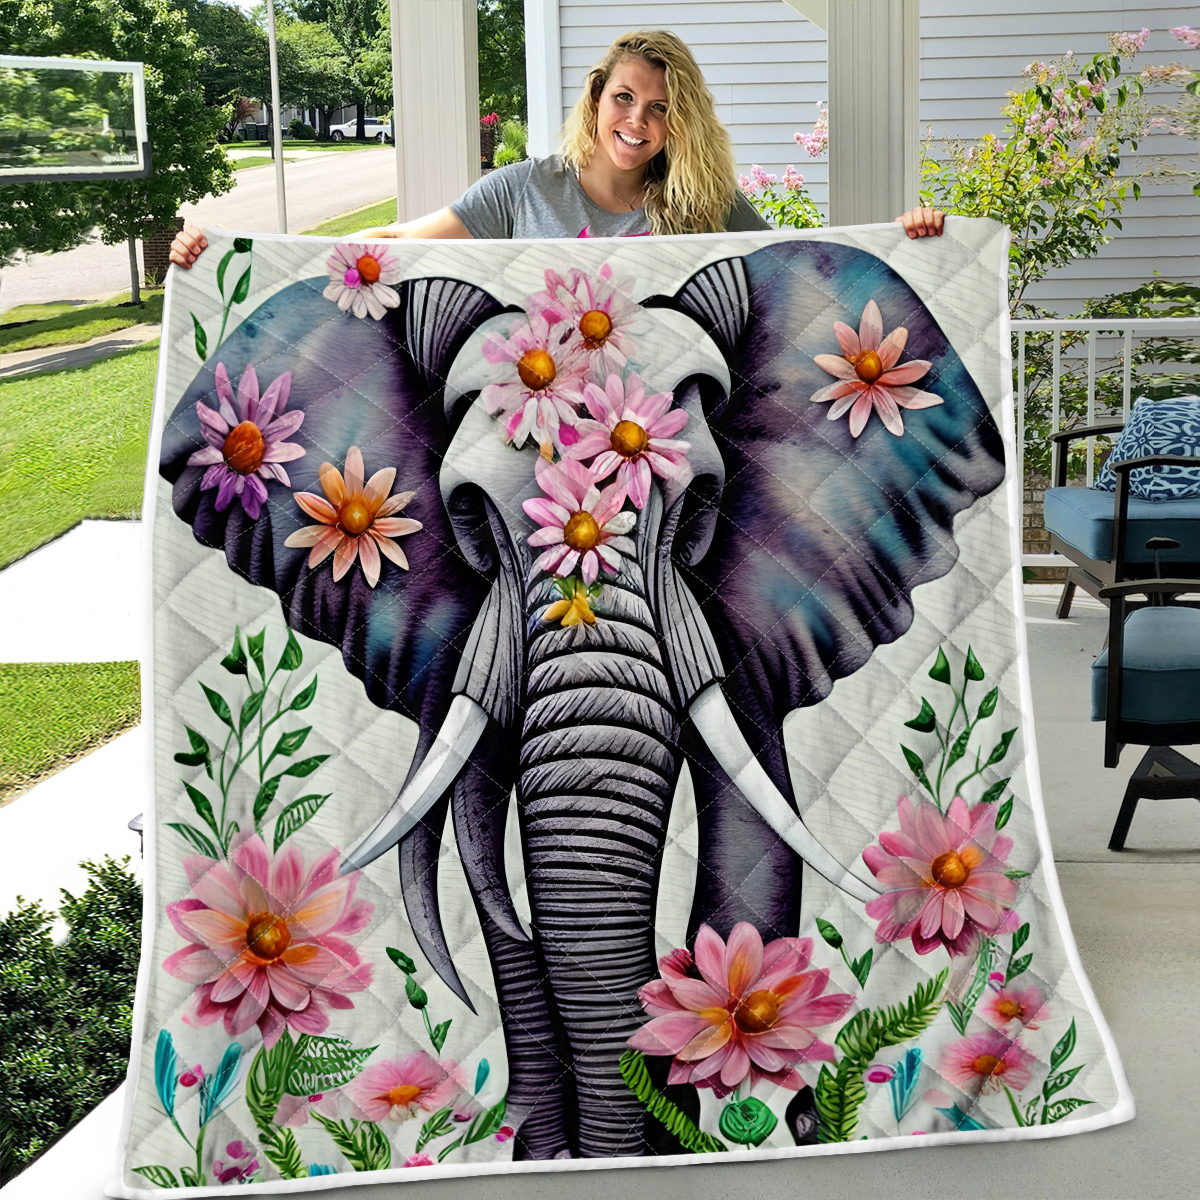 Elephant And Flowers Quilt